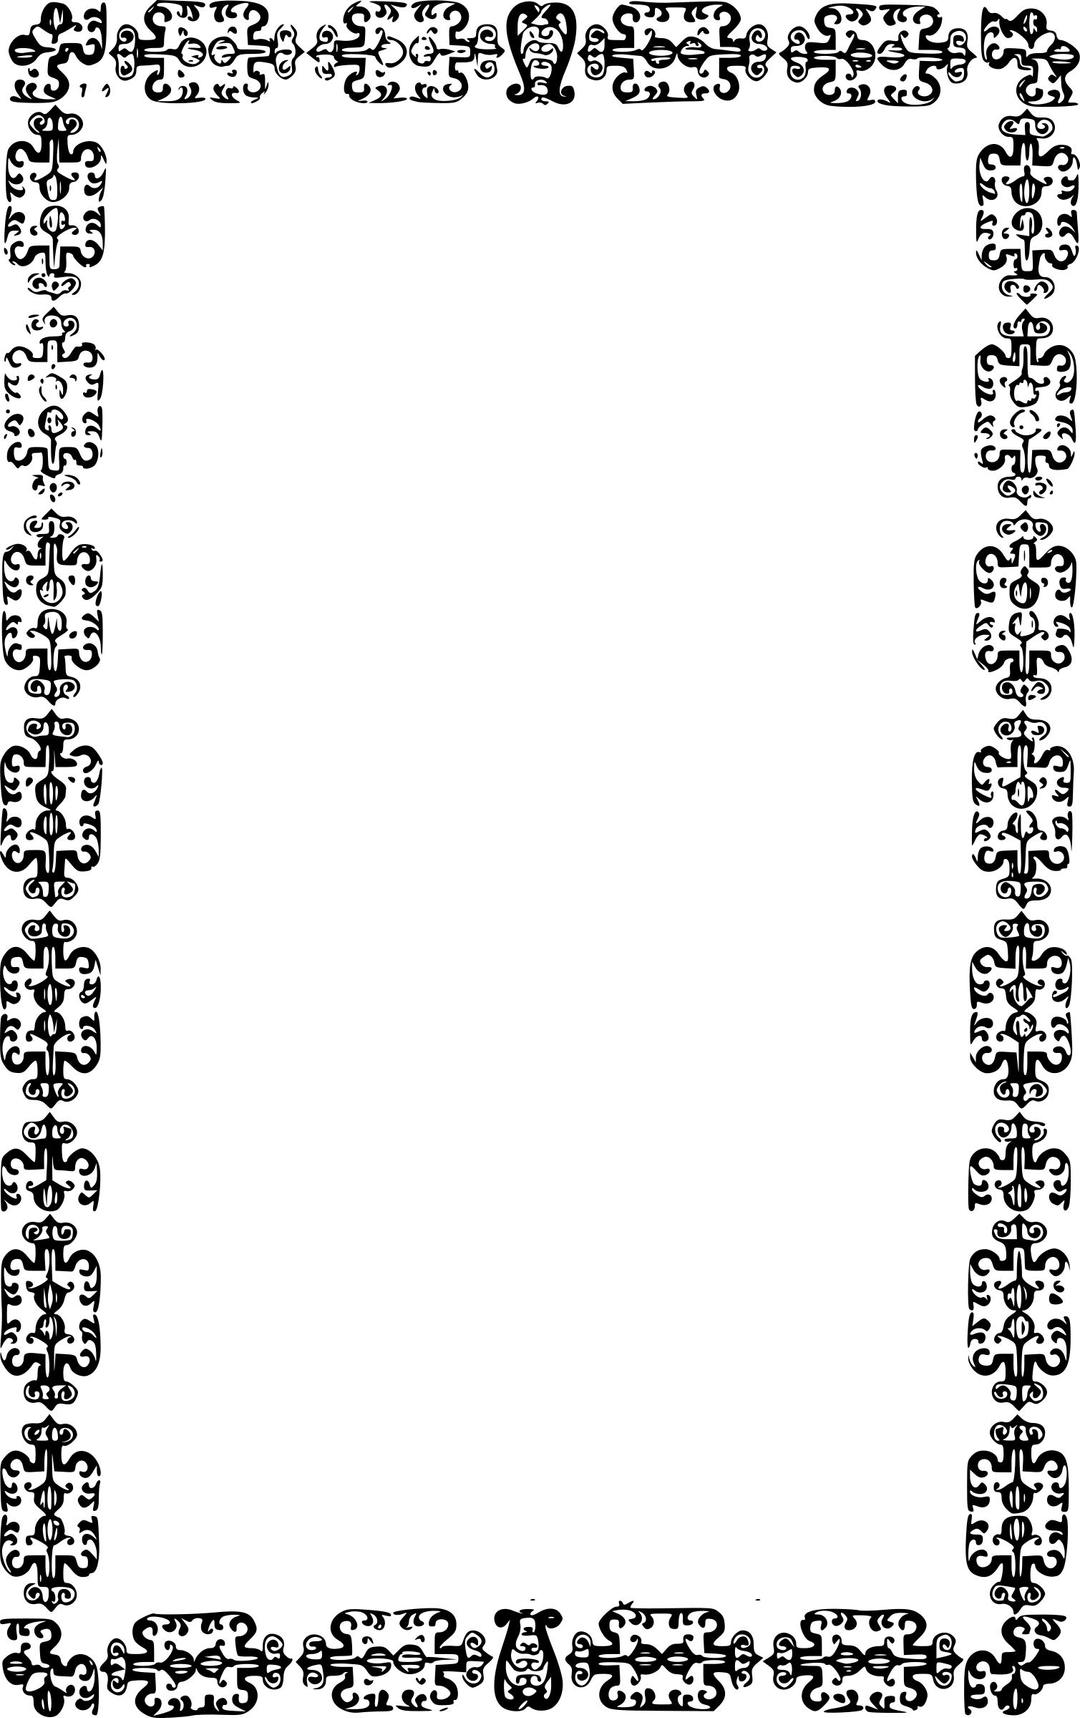 Yet Another Ornate Frame png transparent